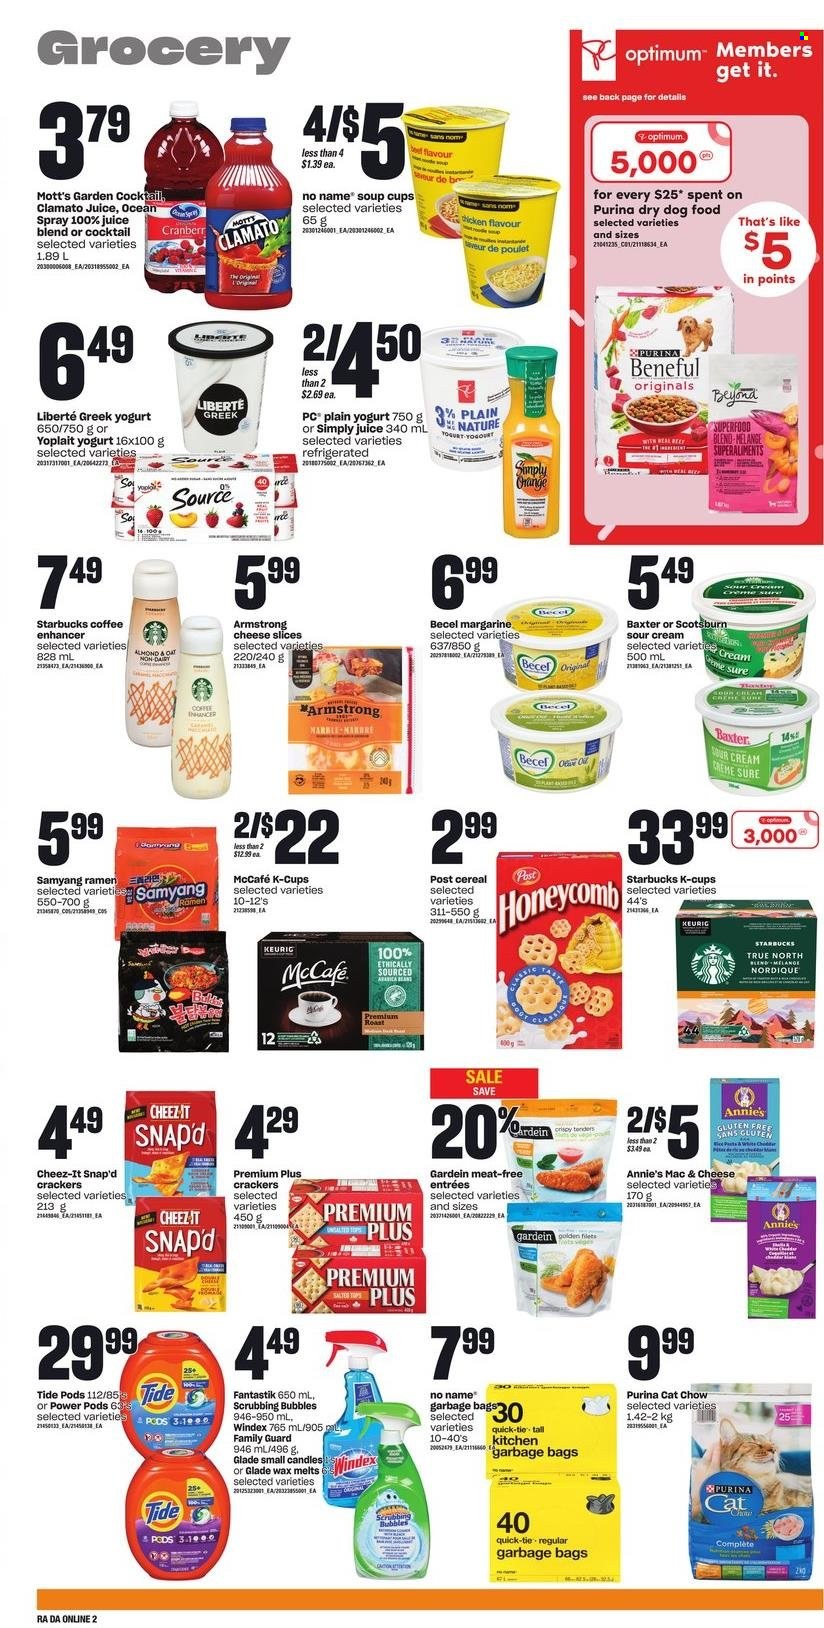 thumbnail - Dominion Flyer - March 23, 2023 - March 29, 2023 - Sales products - Mott's, No Name, ramen, soup, Annie's, roast, sliced cheese, greek yoghurt, yoghurt, Yoplait, margarine, sour cream, crackers, Cheez-It, oats, cereals, juice, Clamato, coffee, coffee capsules, Starbucks, McCafe, K-Cups, Keurig, Windex, Scrubbing Bubbles, Tide, Sure, bag, candle, Glade, animal food, dry dog food, dog food, Purina, Optimum. Page 6.